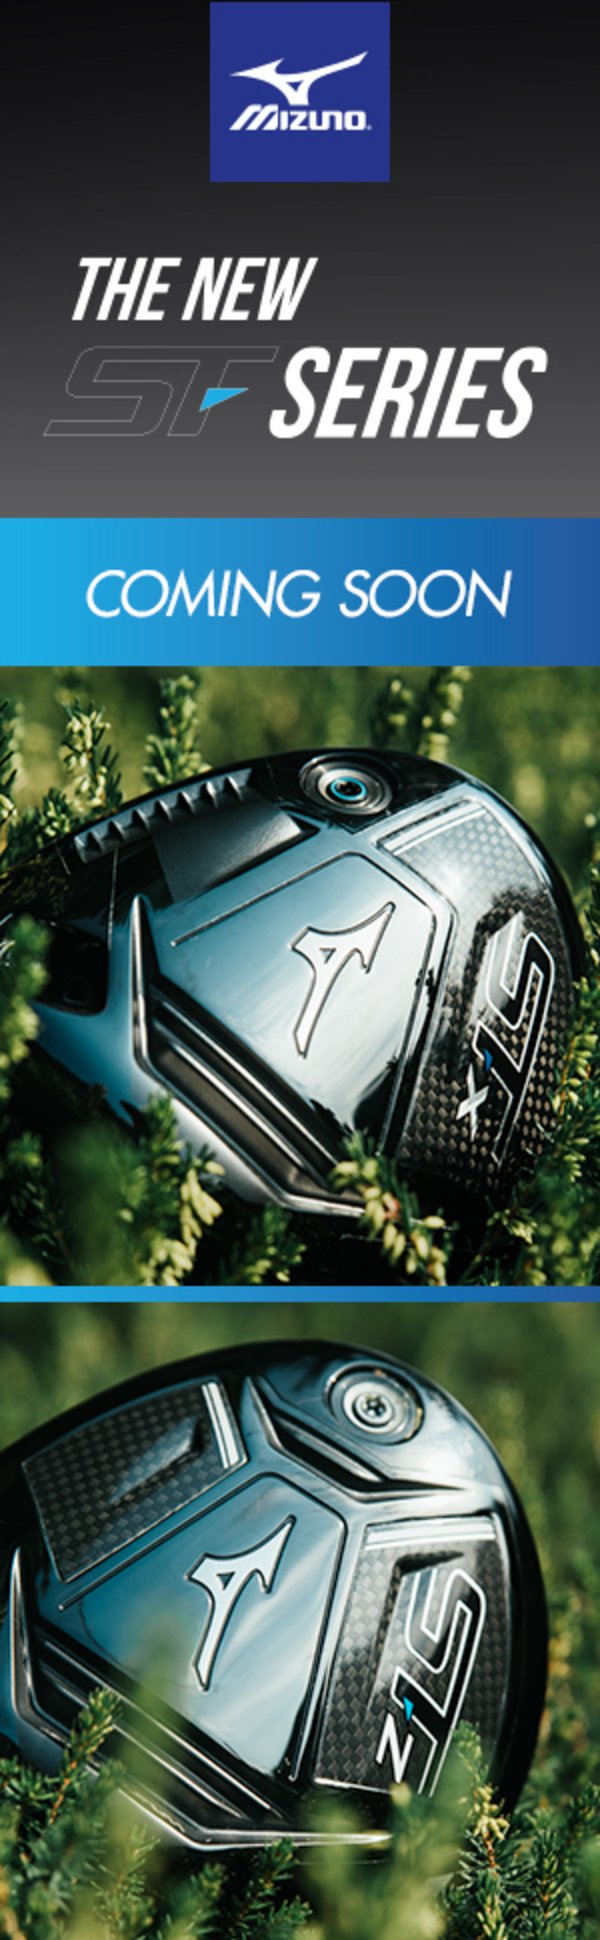 Mizuno ST Series - Coming to the Pro Shop soon